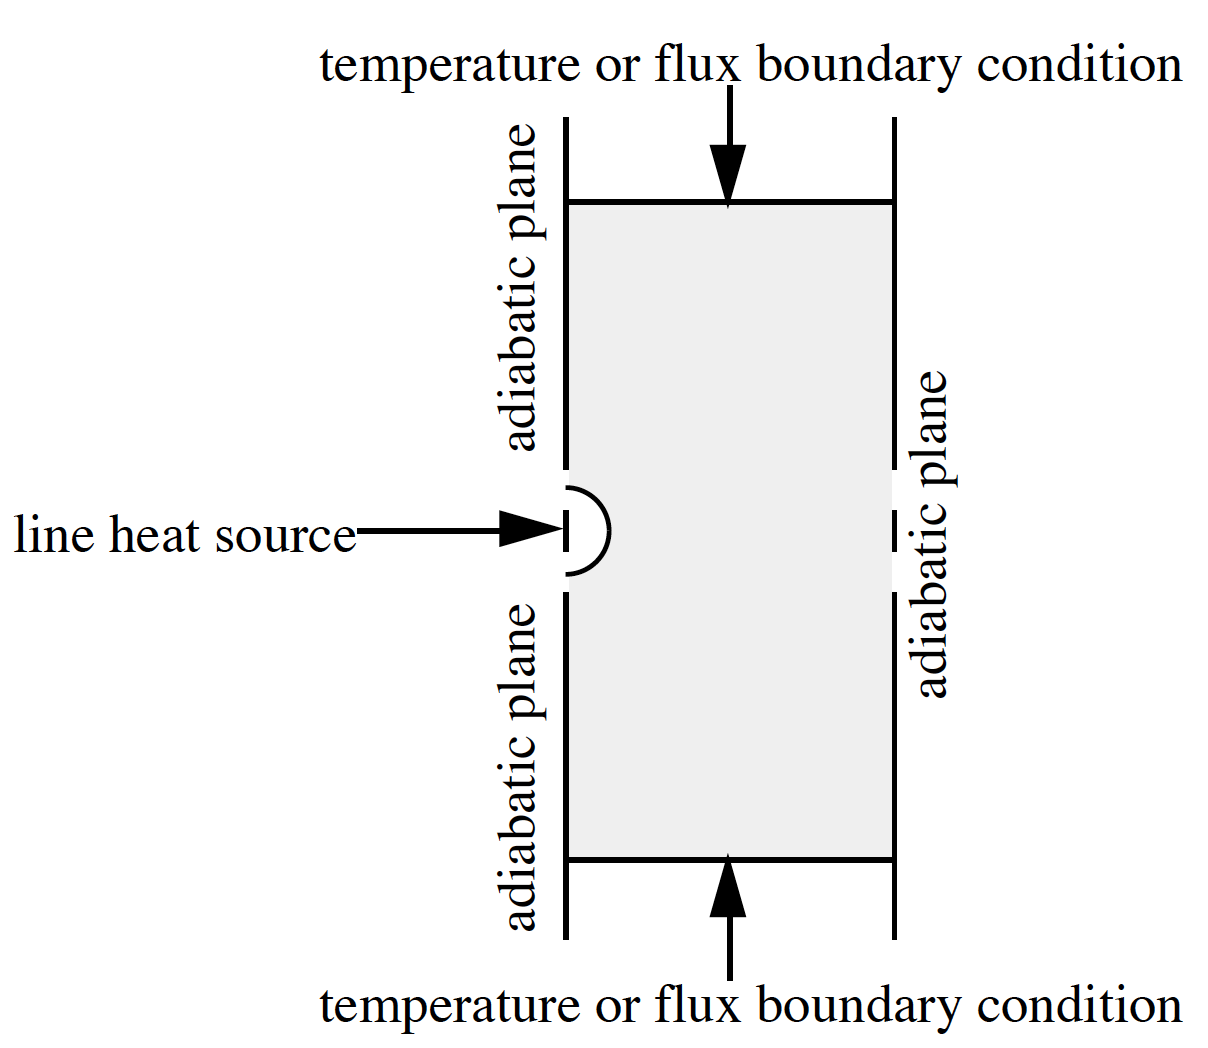 Two-Dimensional Solution Domain for a Low Temperature Radiant System